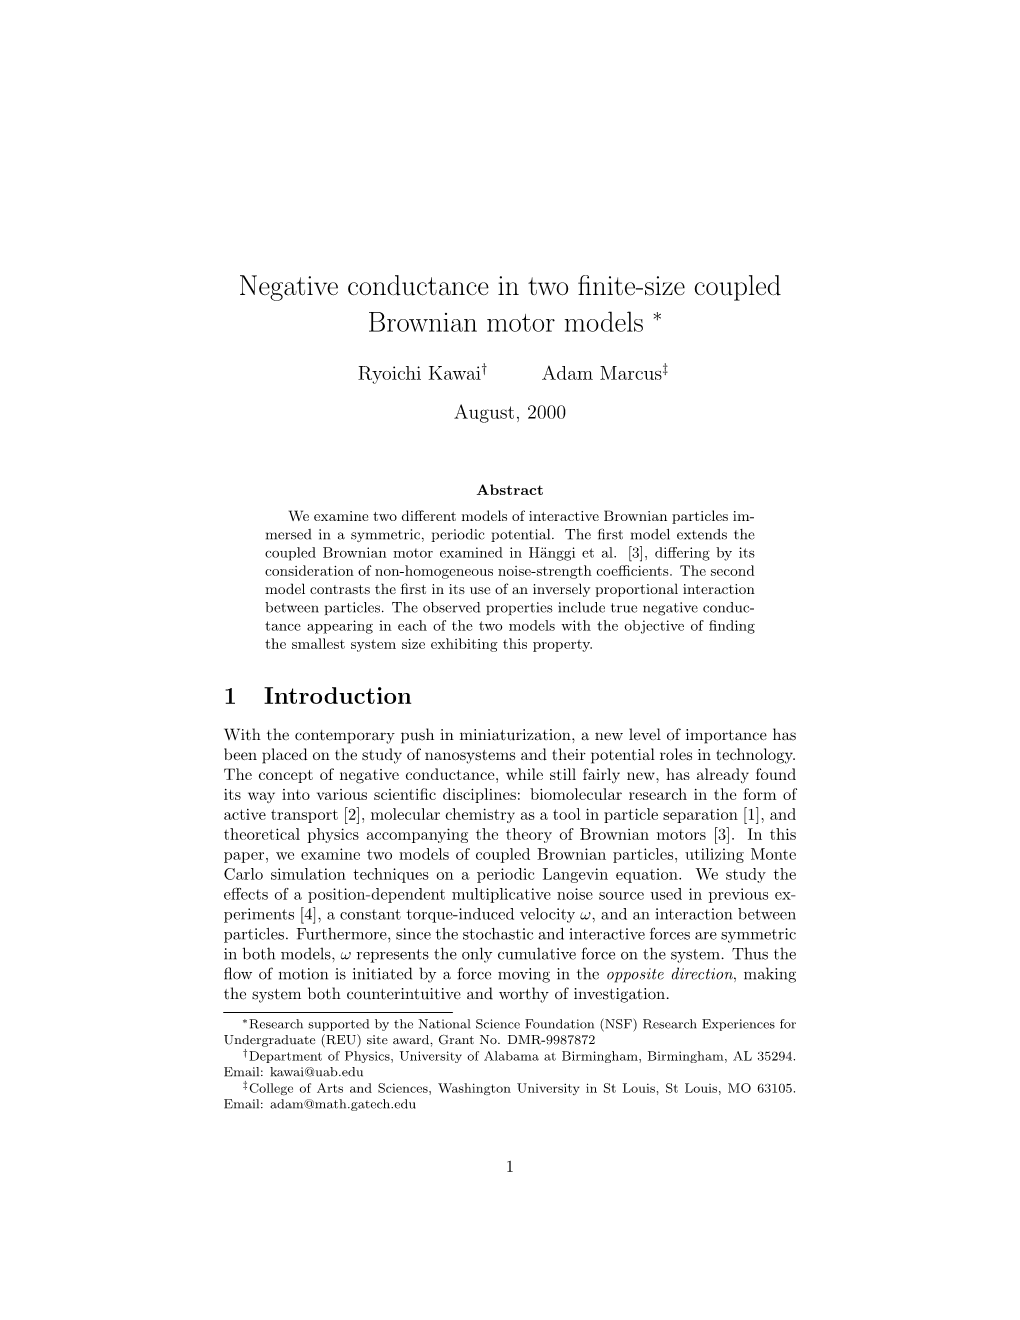 Negative Conductance in Two Finite-Size Coupled Brownian Motor